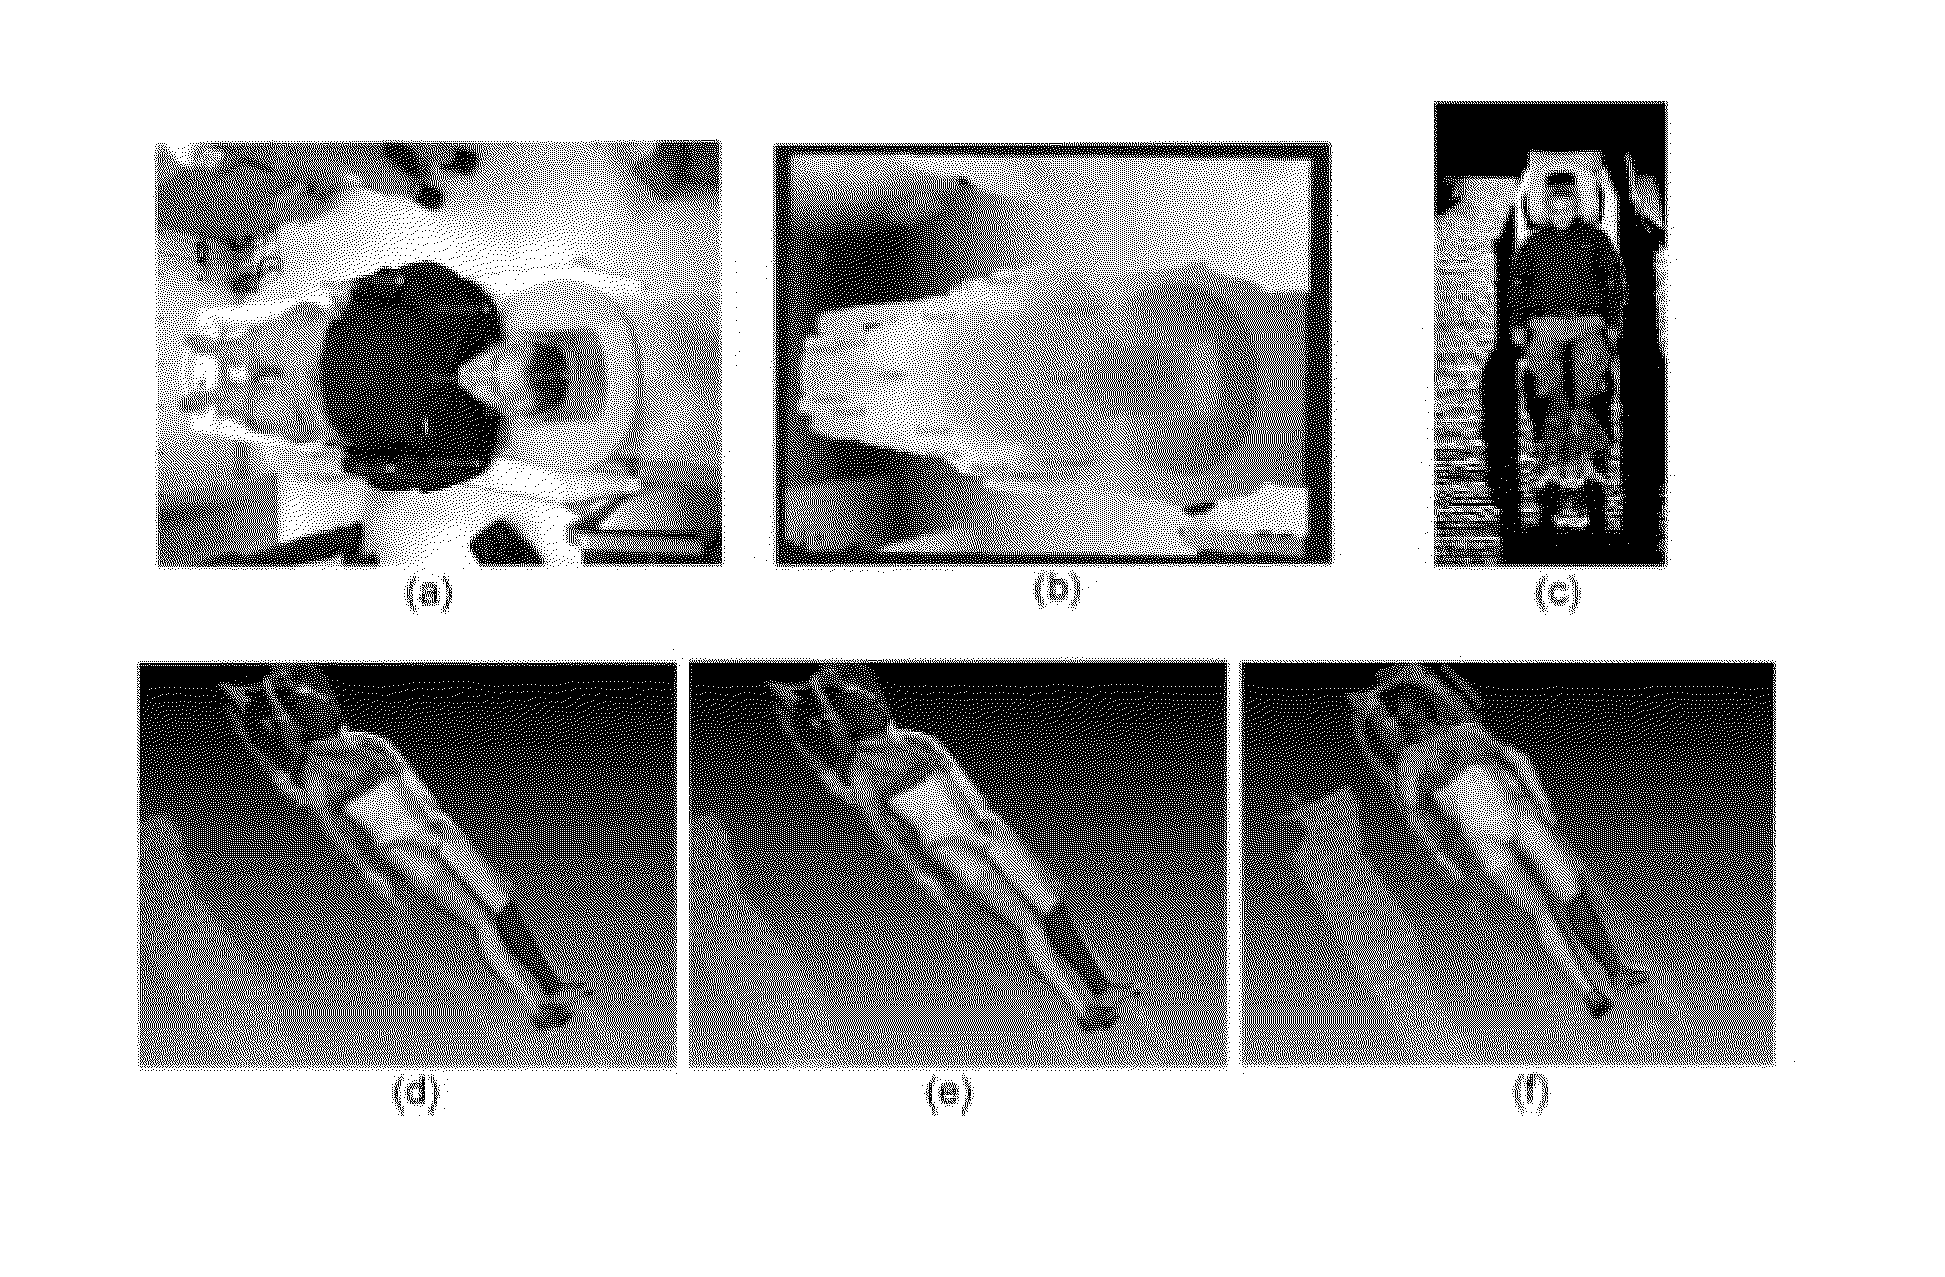 Method and System for Constructing Personalized Avatars Using a Parameterized Deformable Mesh